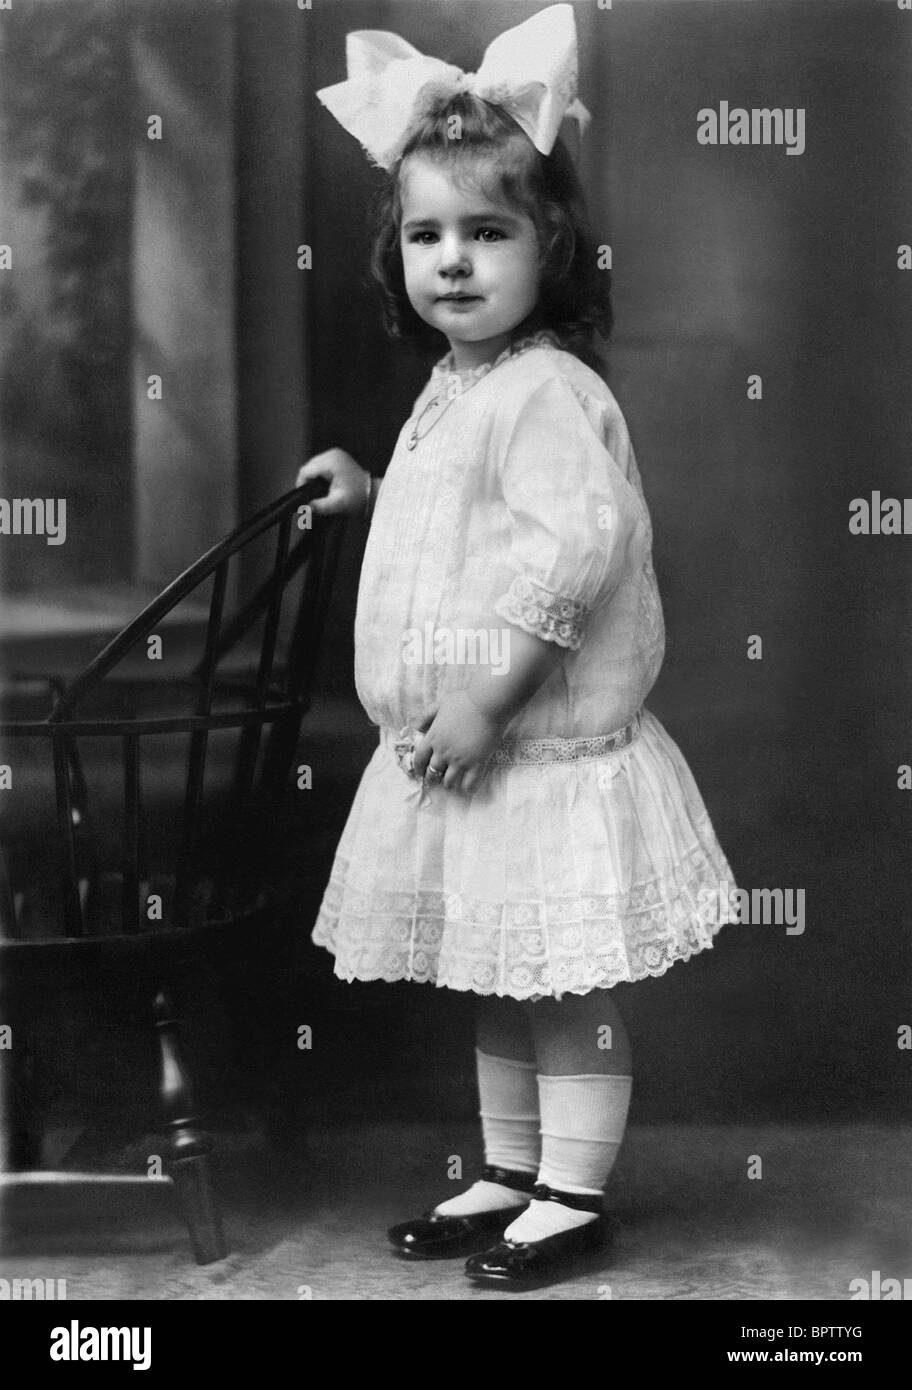 RUTH HUSSEY AT 3 YEARS OLD ACTRESS (1917) Stock Photo